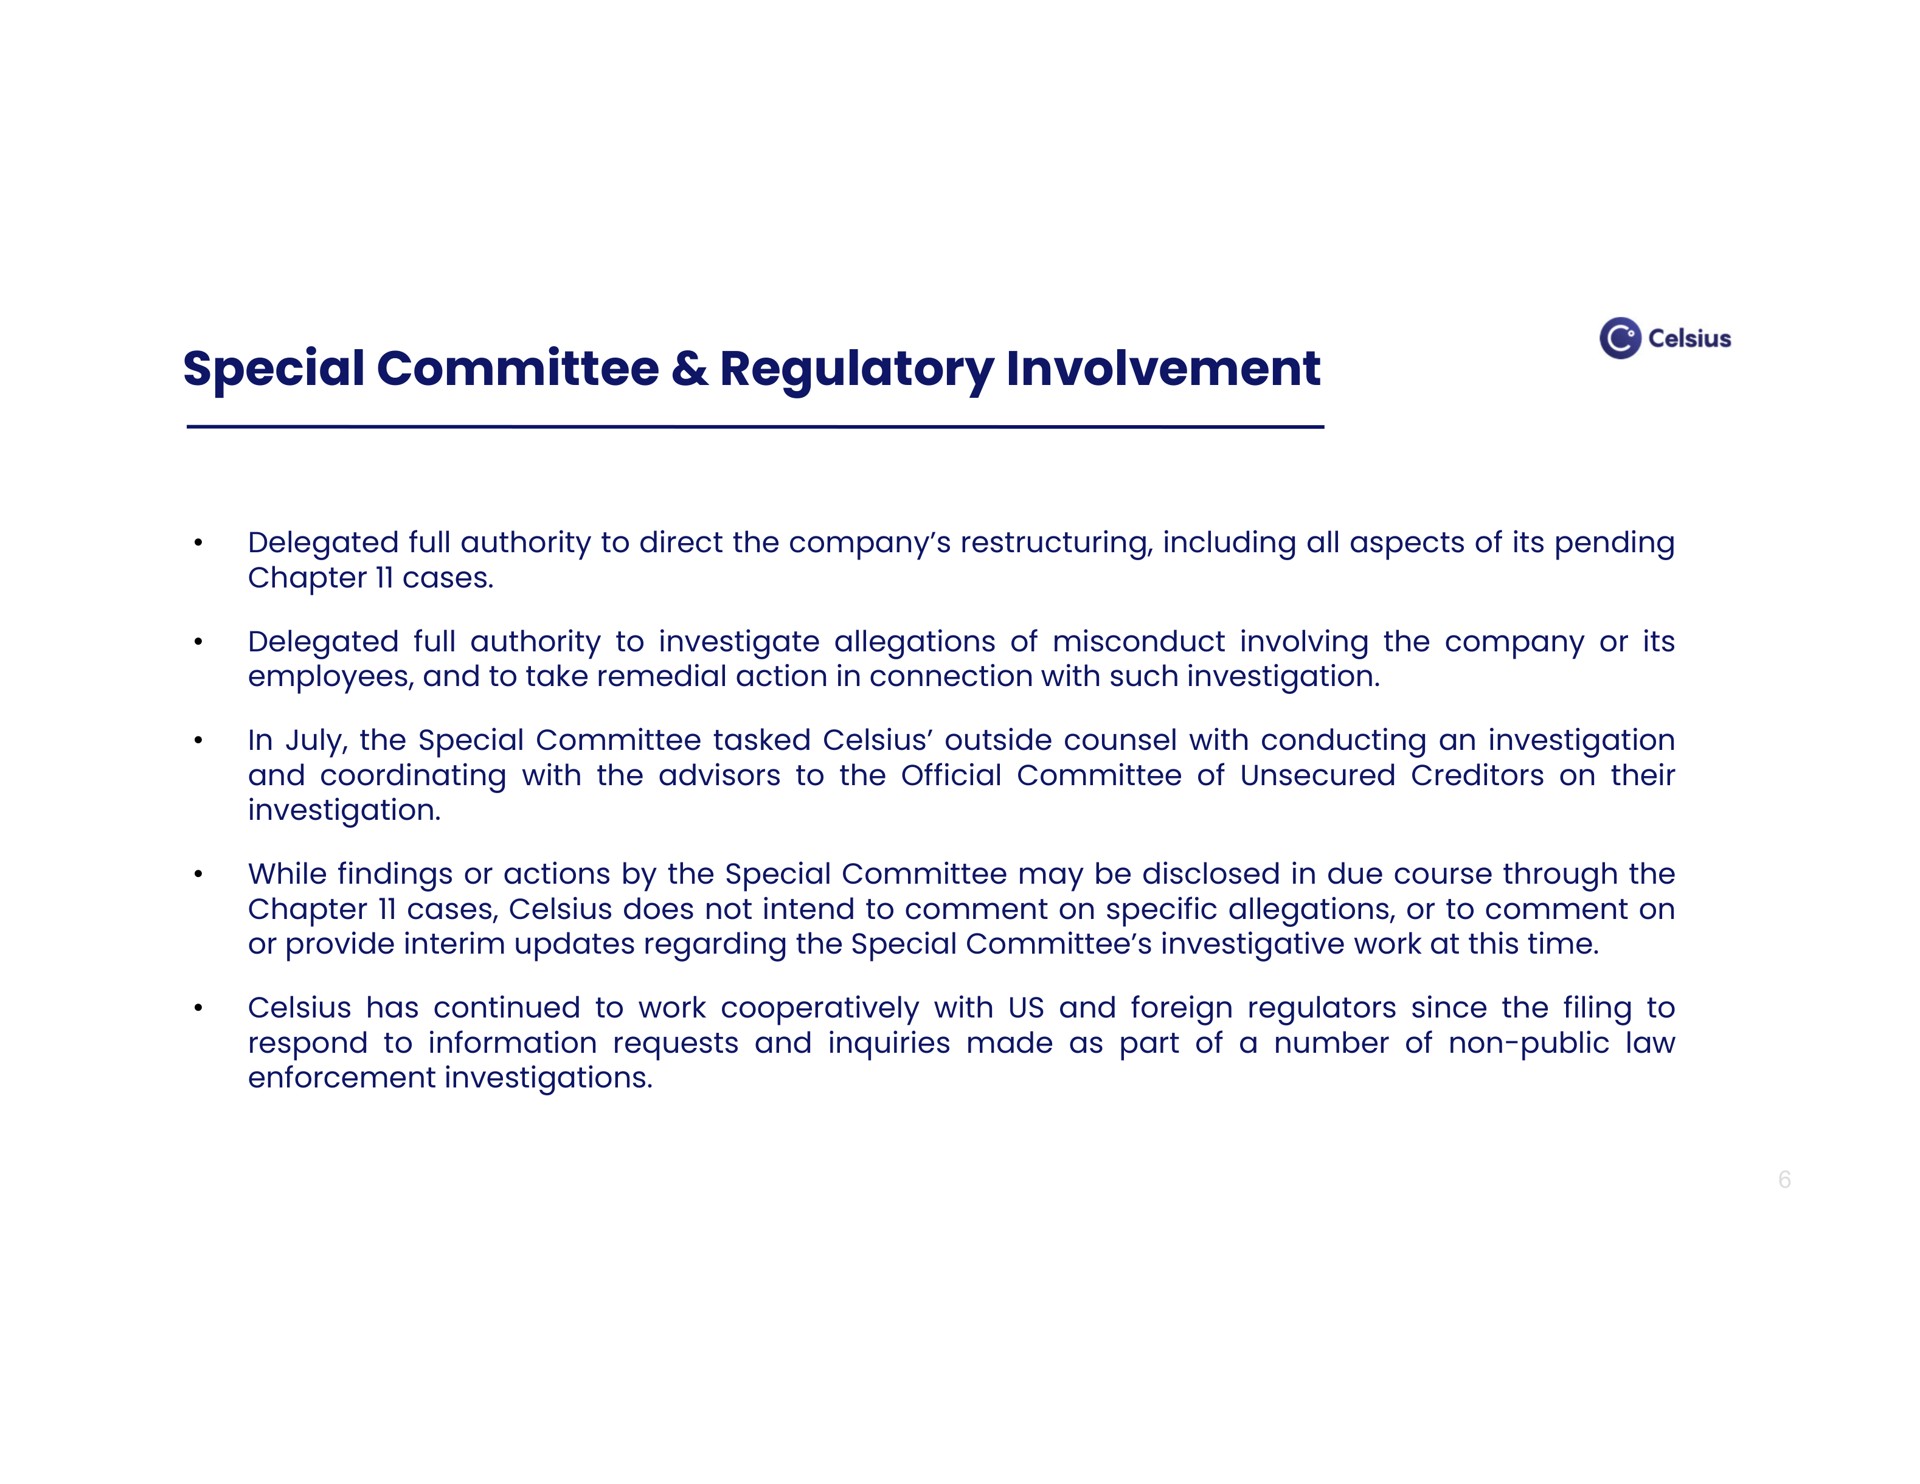 special committee regulatory involvement | Celsius Holdings